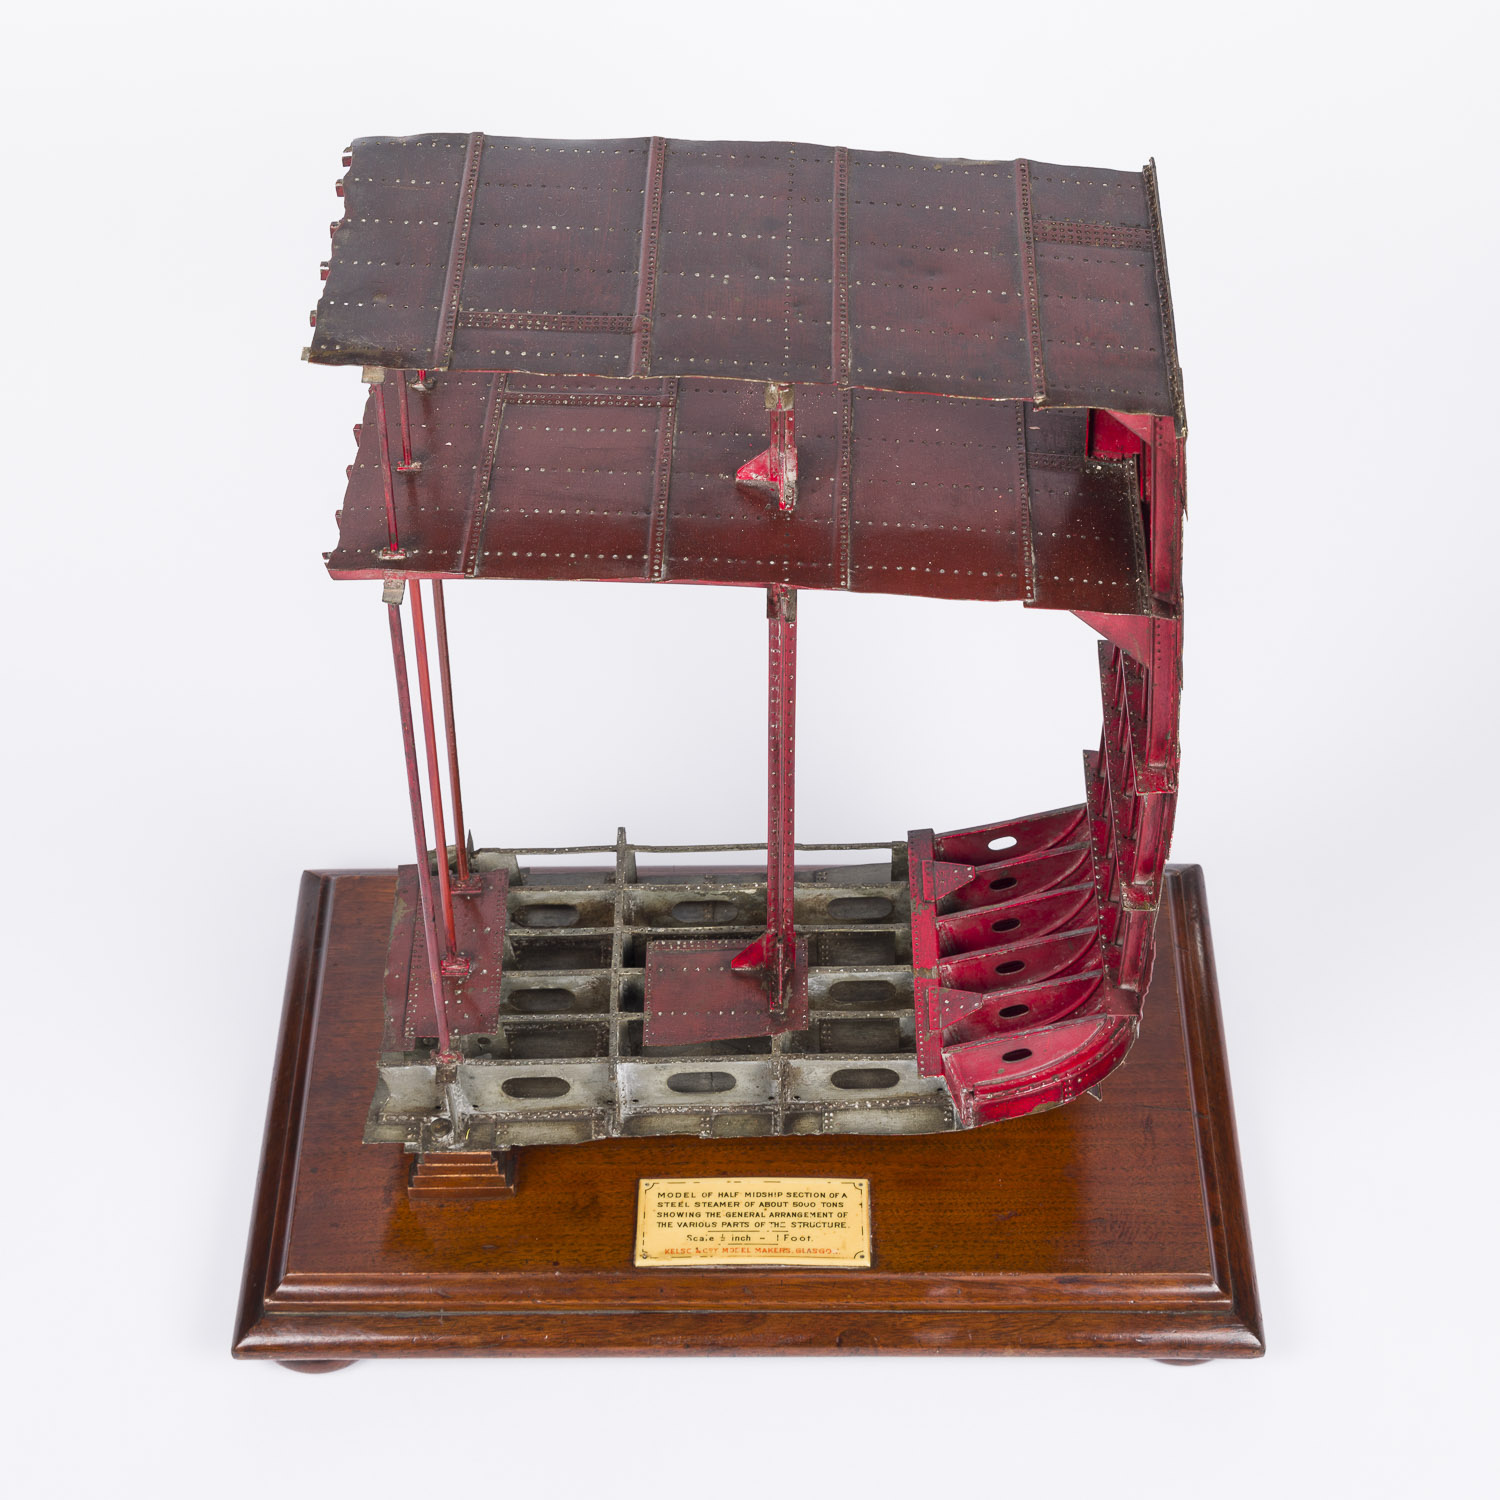 Shipbuilder’s model of half a midship section of a steel steamer